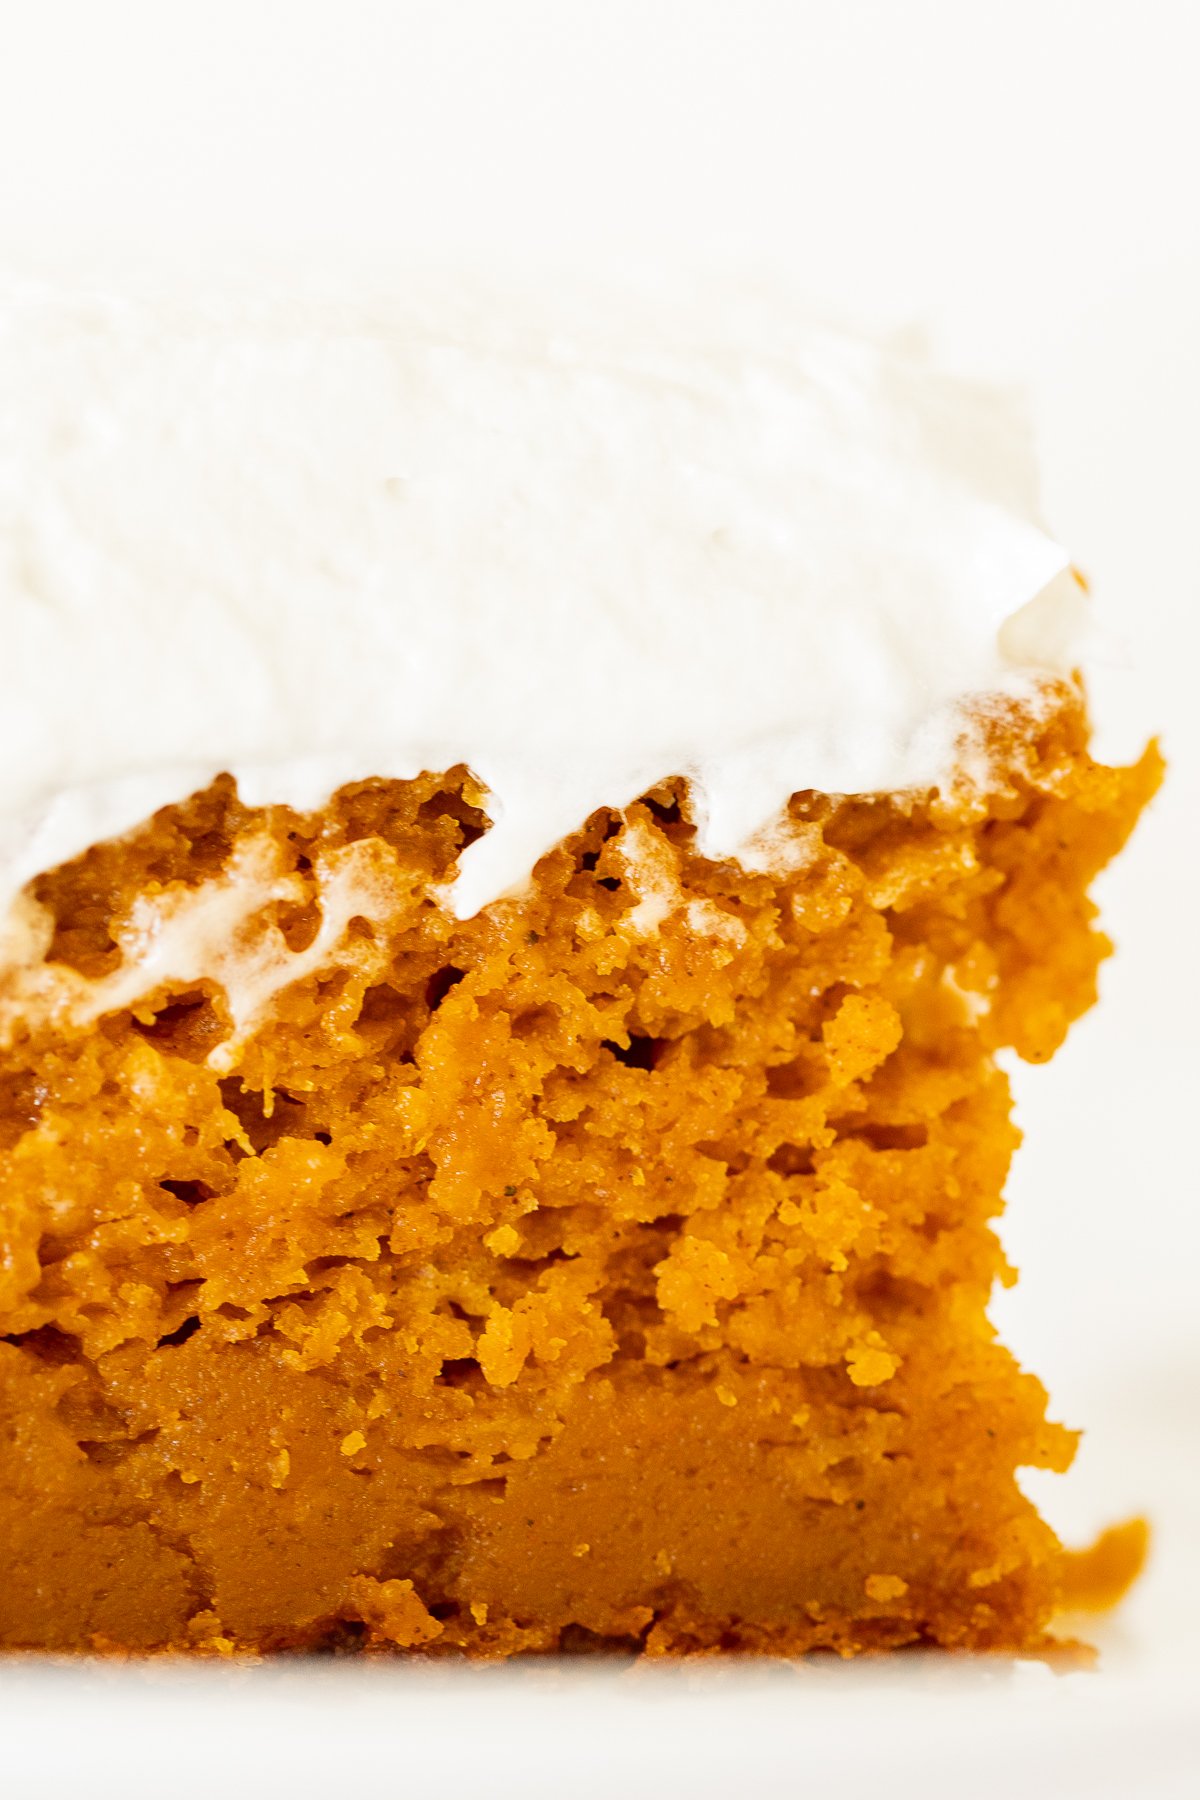 A delectable pumpkin cake on a plate.